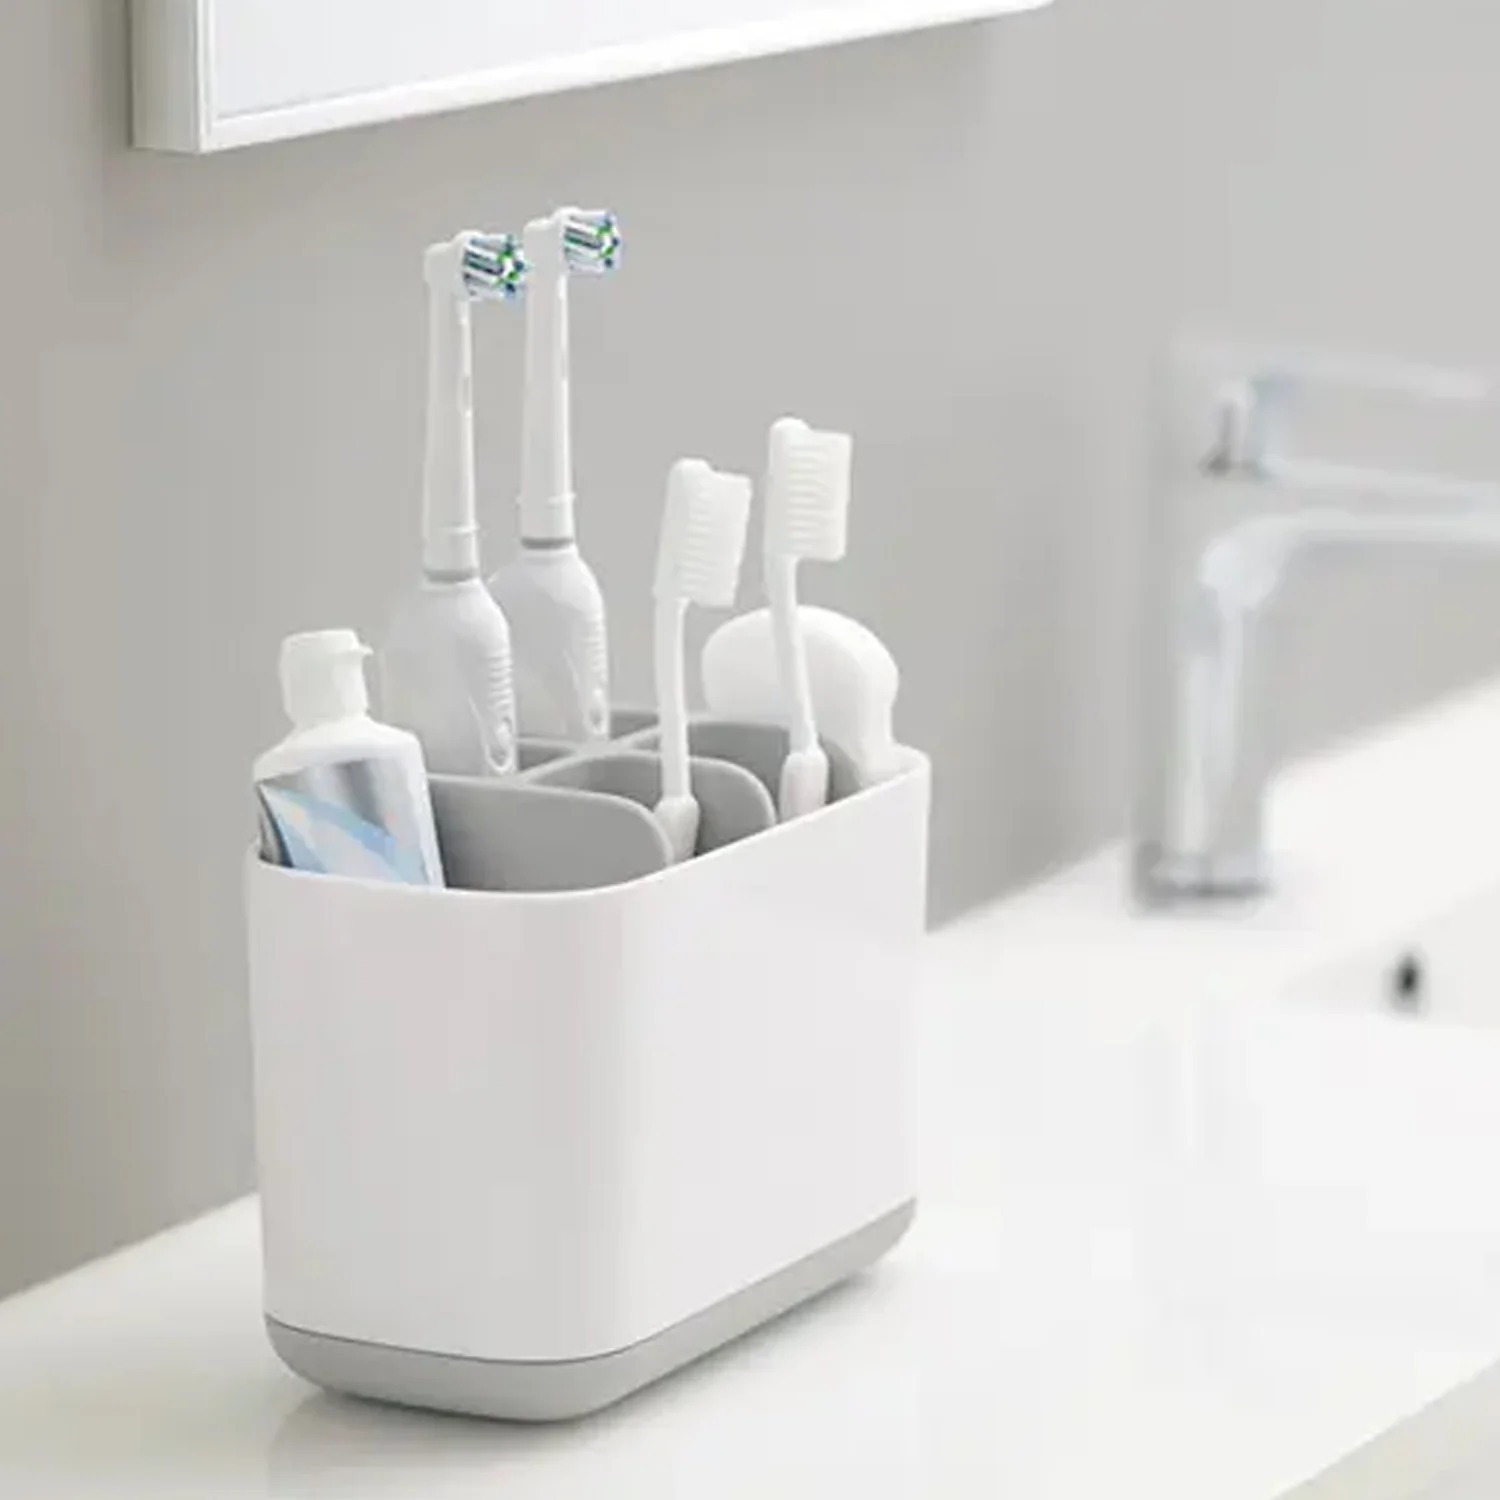 TOOTHBRUSH HOLDER STAND